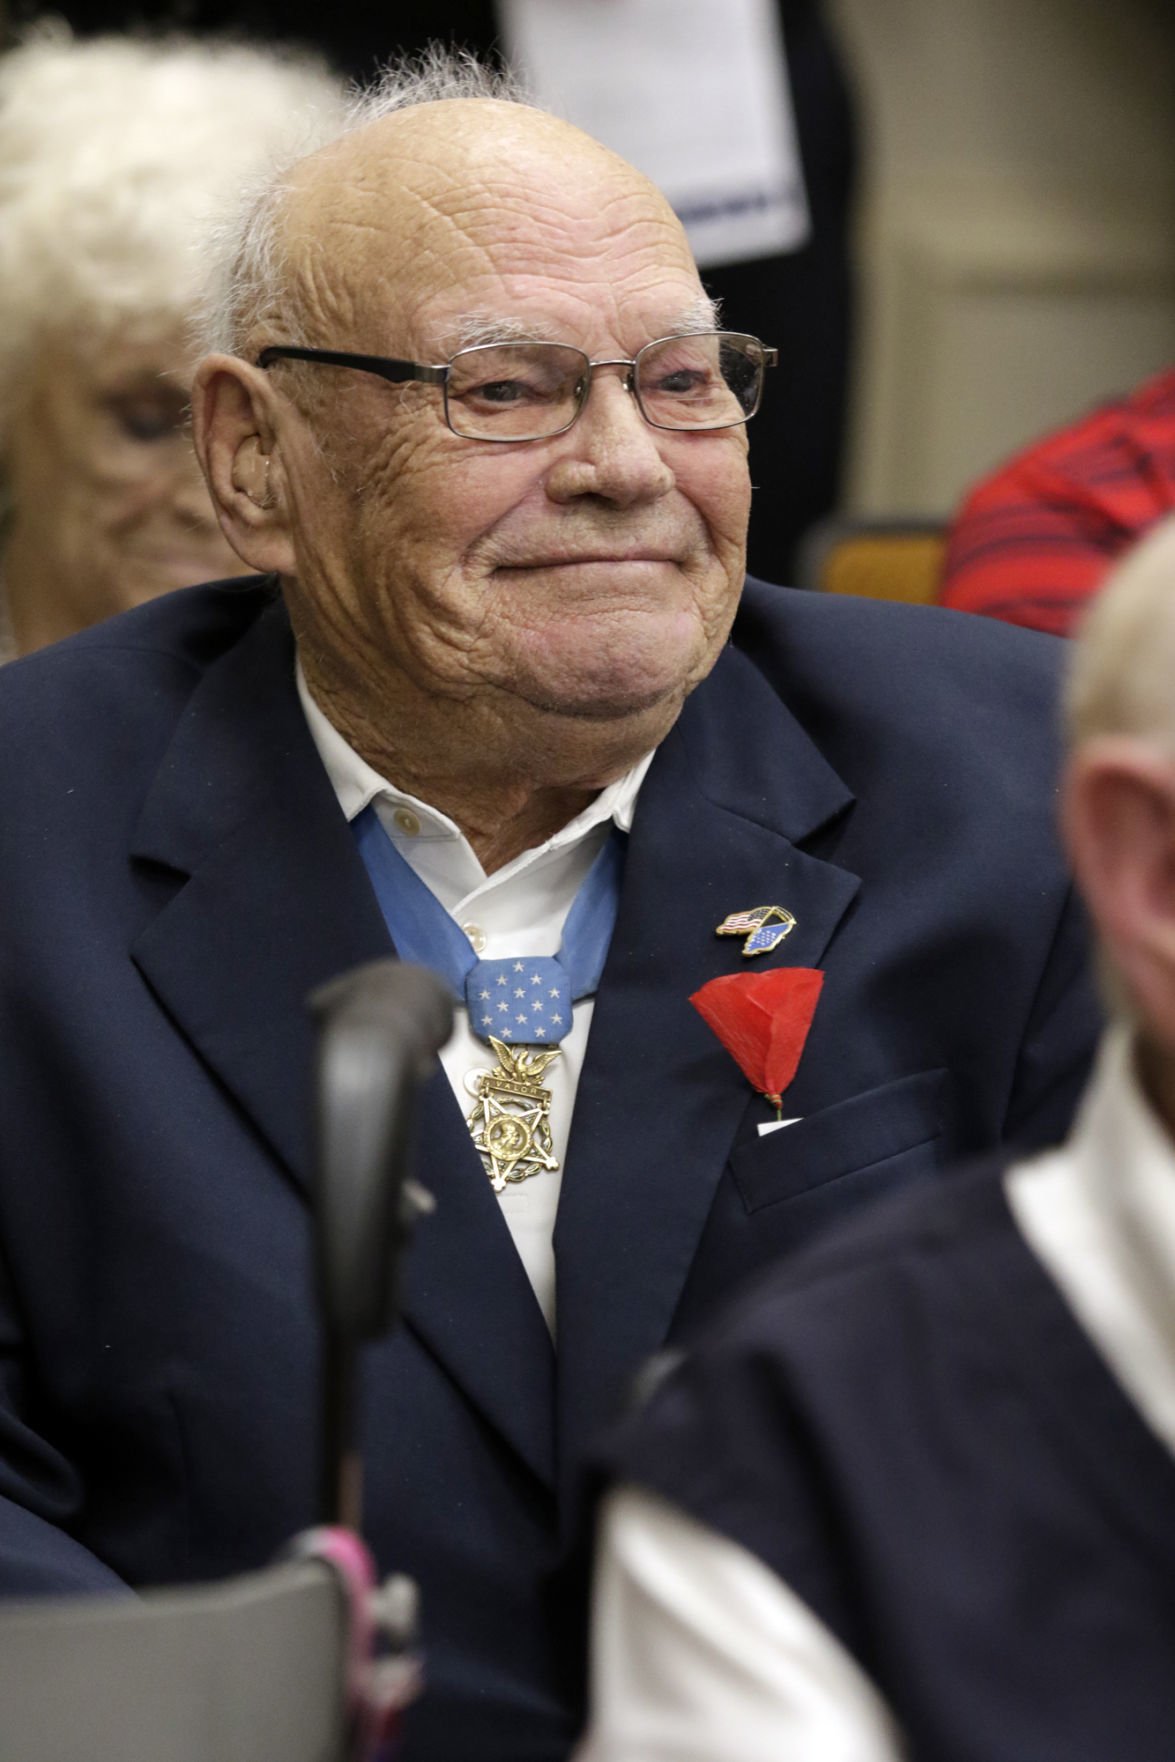 why do medal of honor recipients retire after receiving it